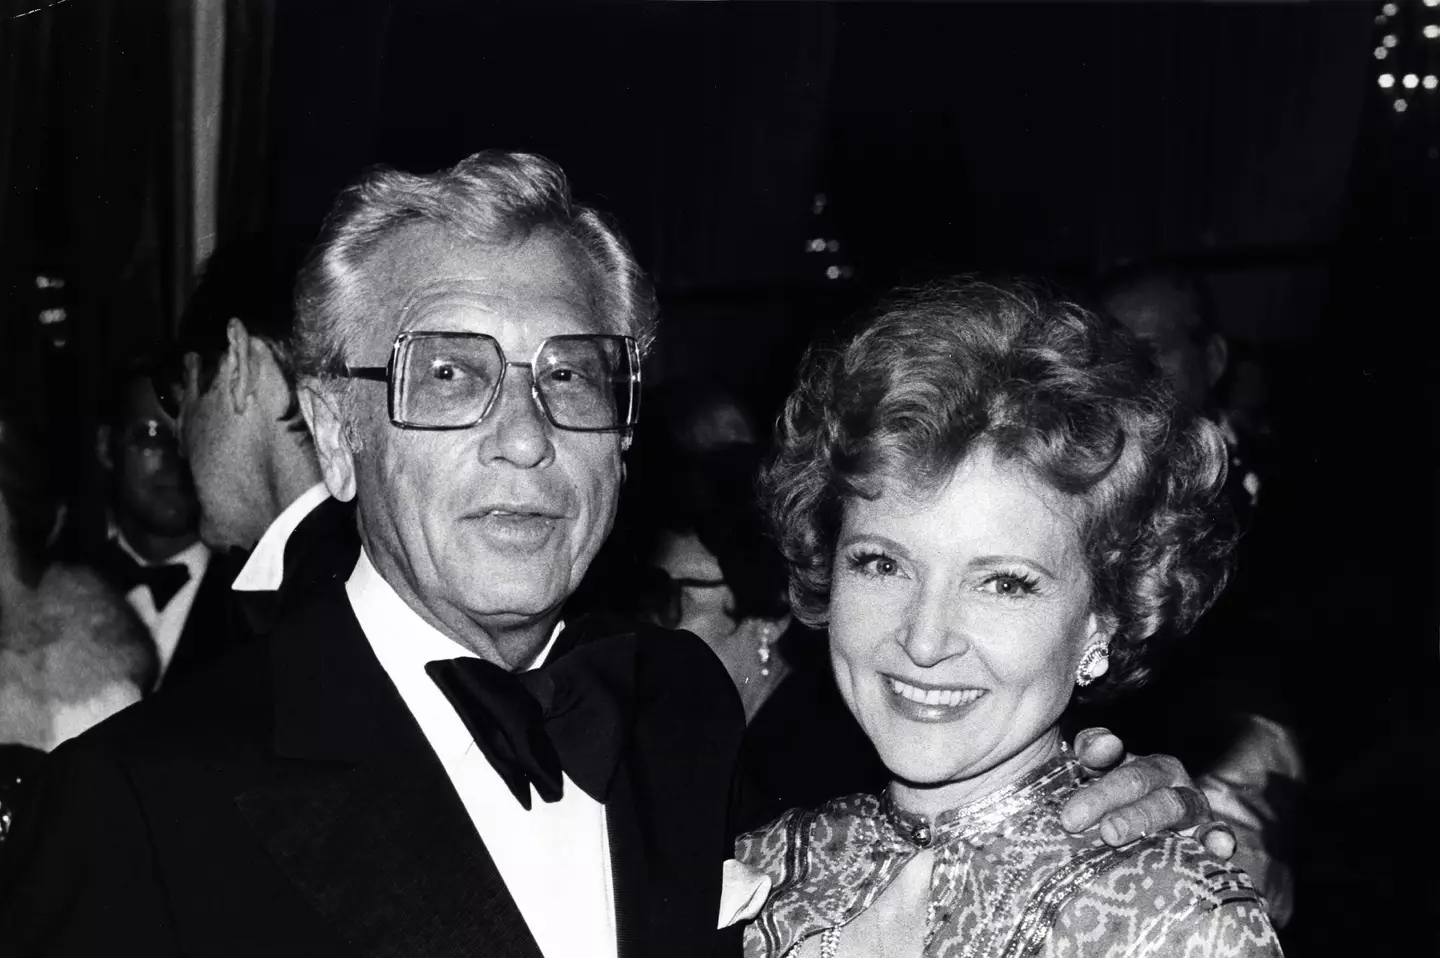 Betty was married to Allen between the years of 1963 to 1981 (